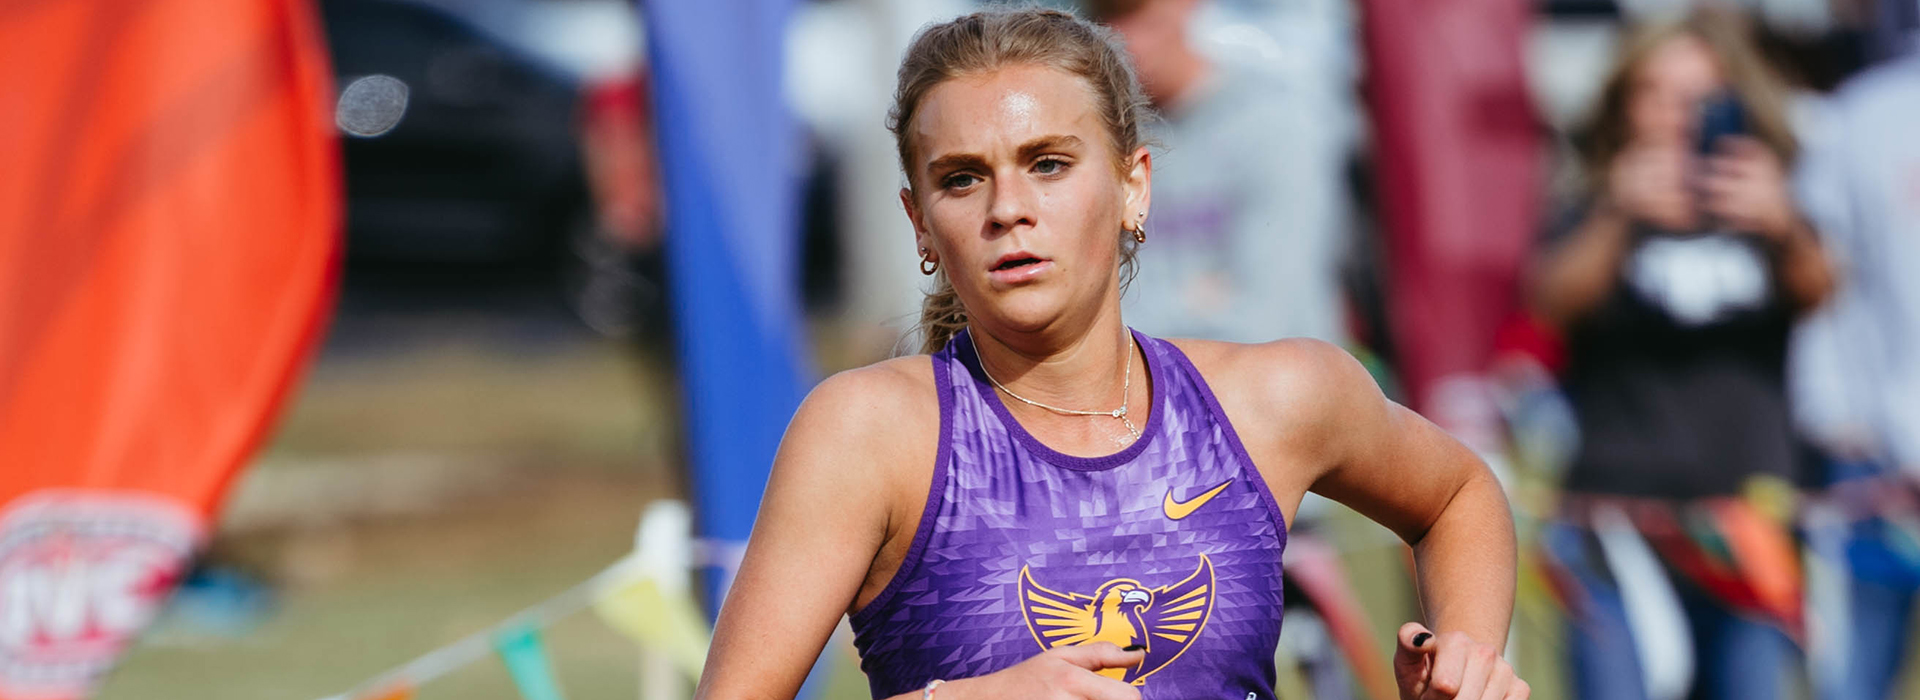 Purple and gold go the distance for number of PRs on day one of Outdoor Music City Challenge